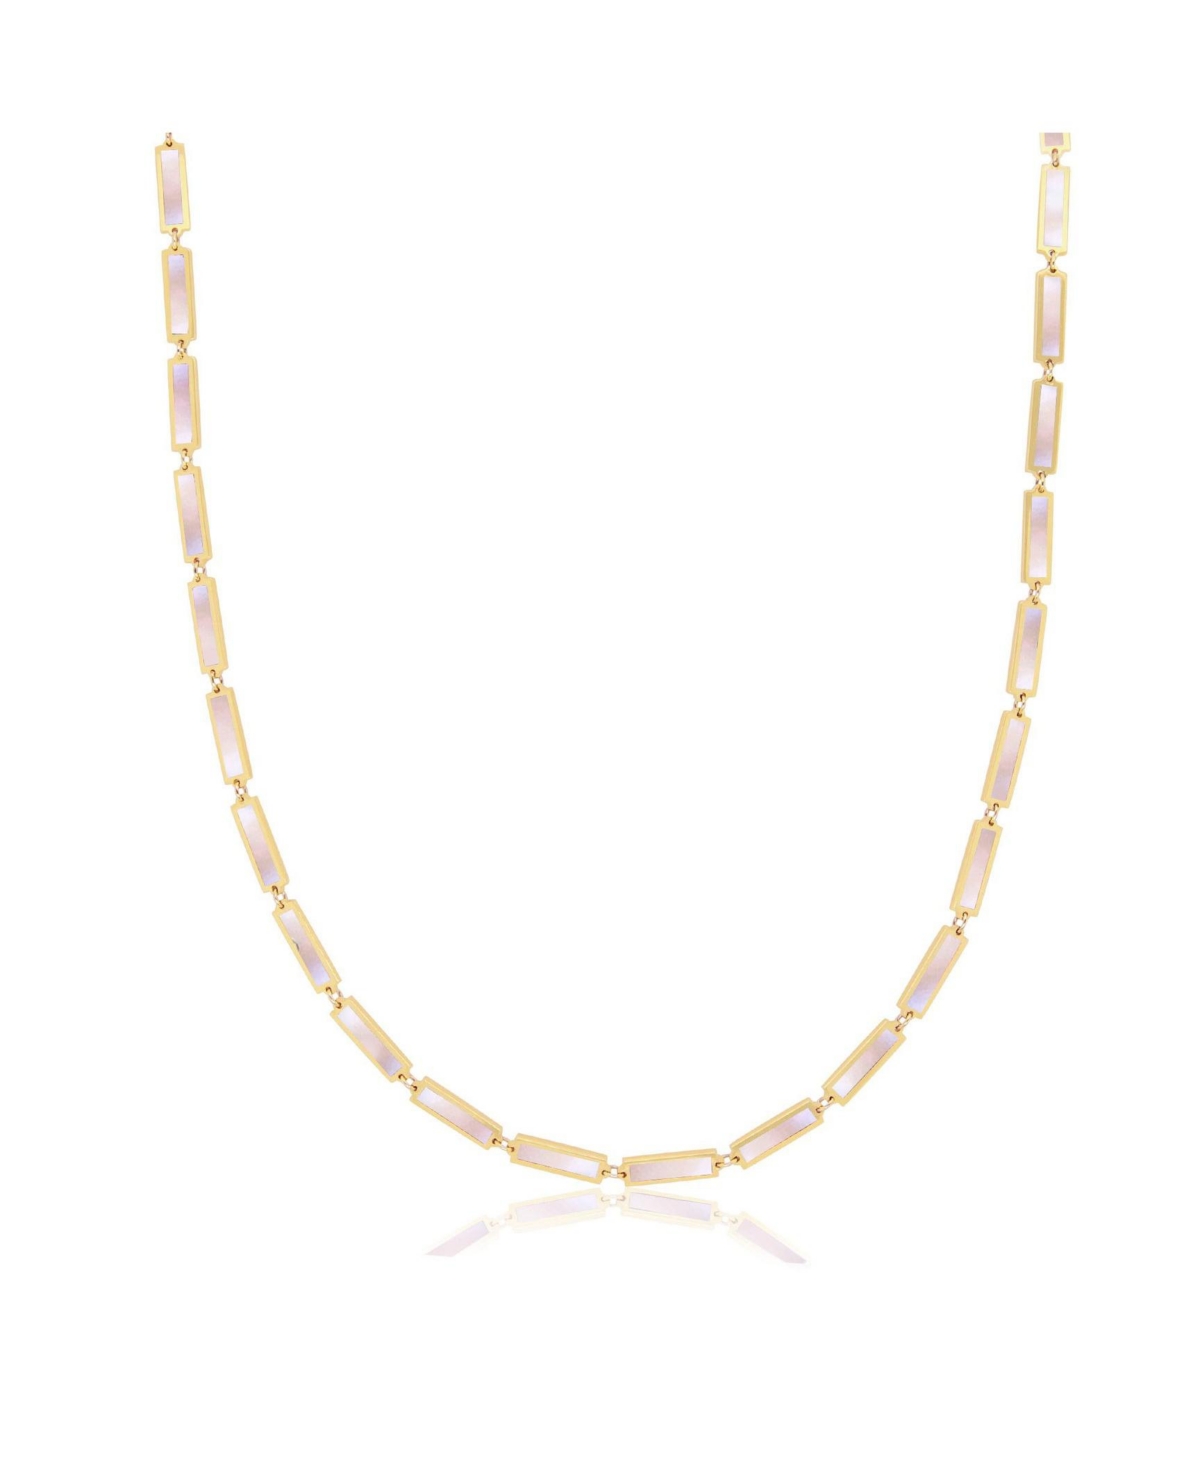 Mother of Pearl Bar Necklace - White